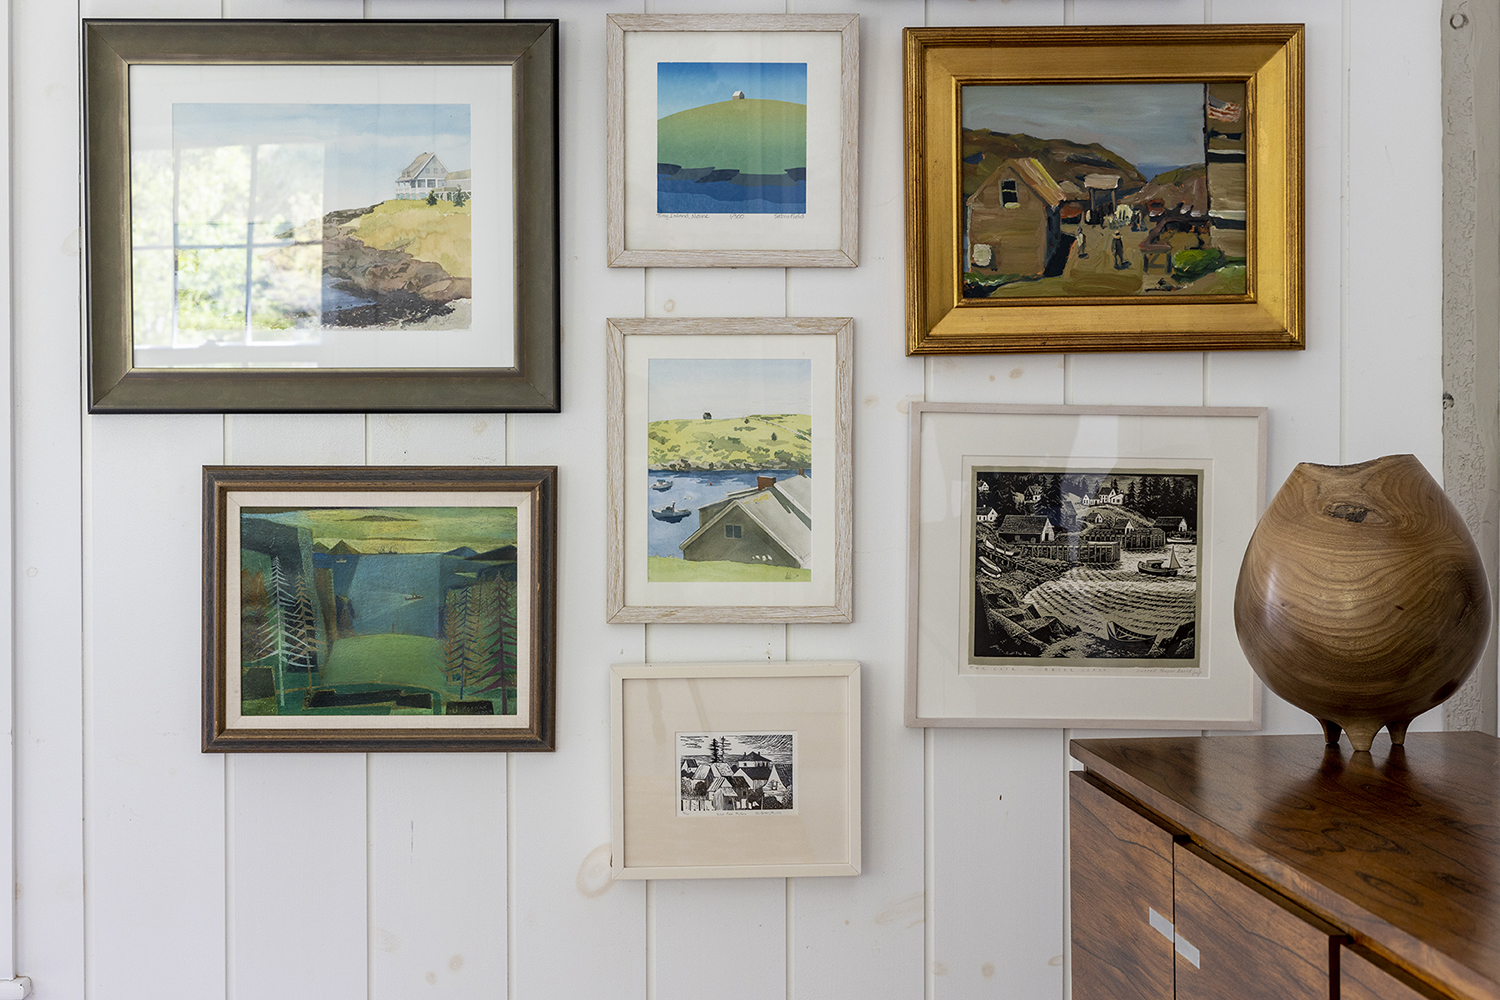 Several works of art completed by Maine artists are framed and hung on a white interior wall.